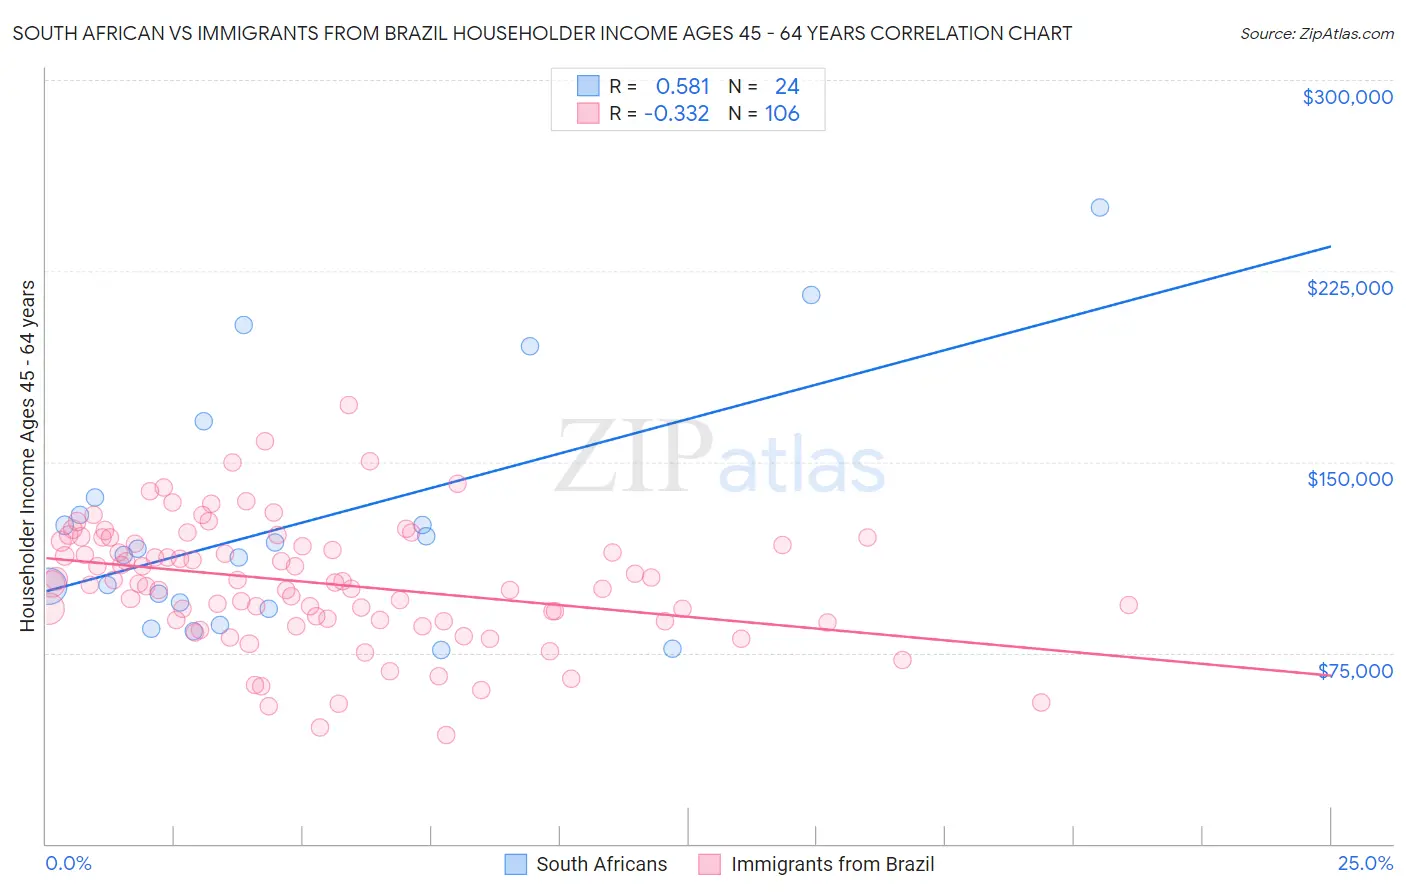 South African vs Immigrants from Brazil Householder Income Ages 45 - 64 years